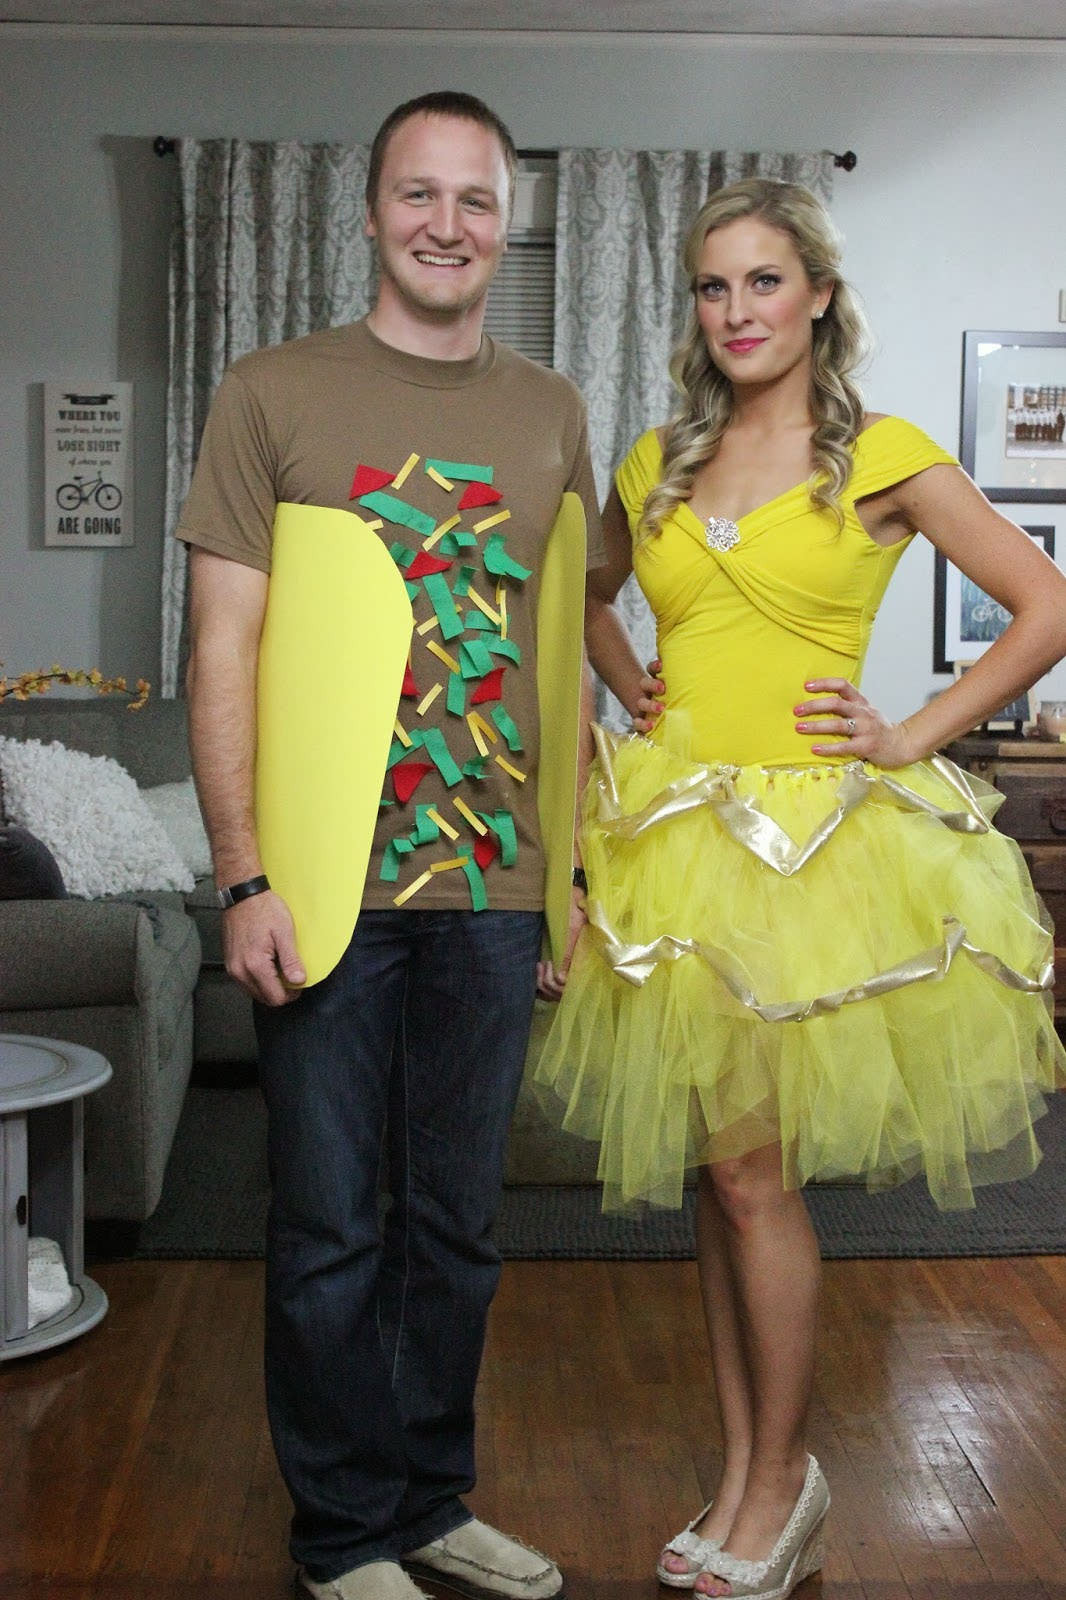 DIY Couples Costumes Ideas
 15 DIY Couples and Family Halloween Costumes